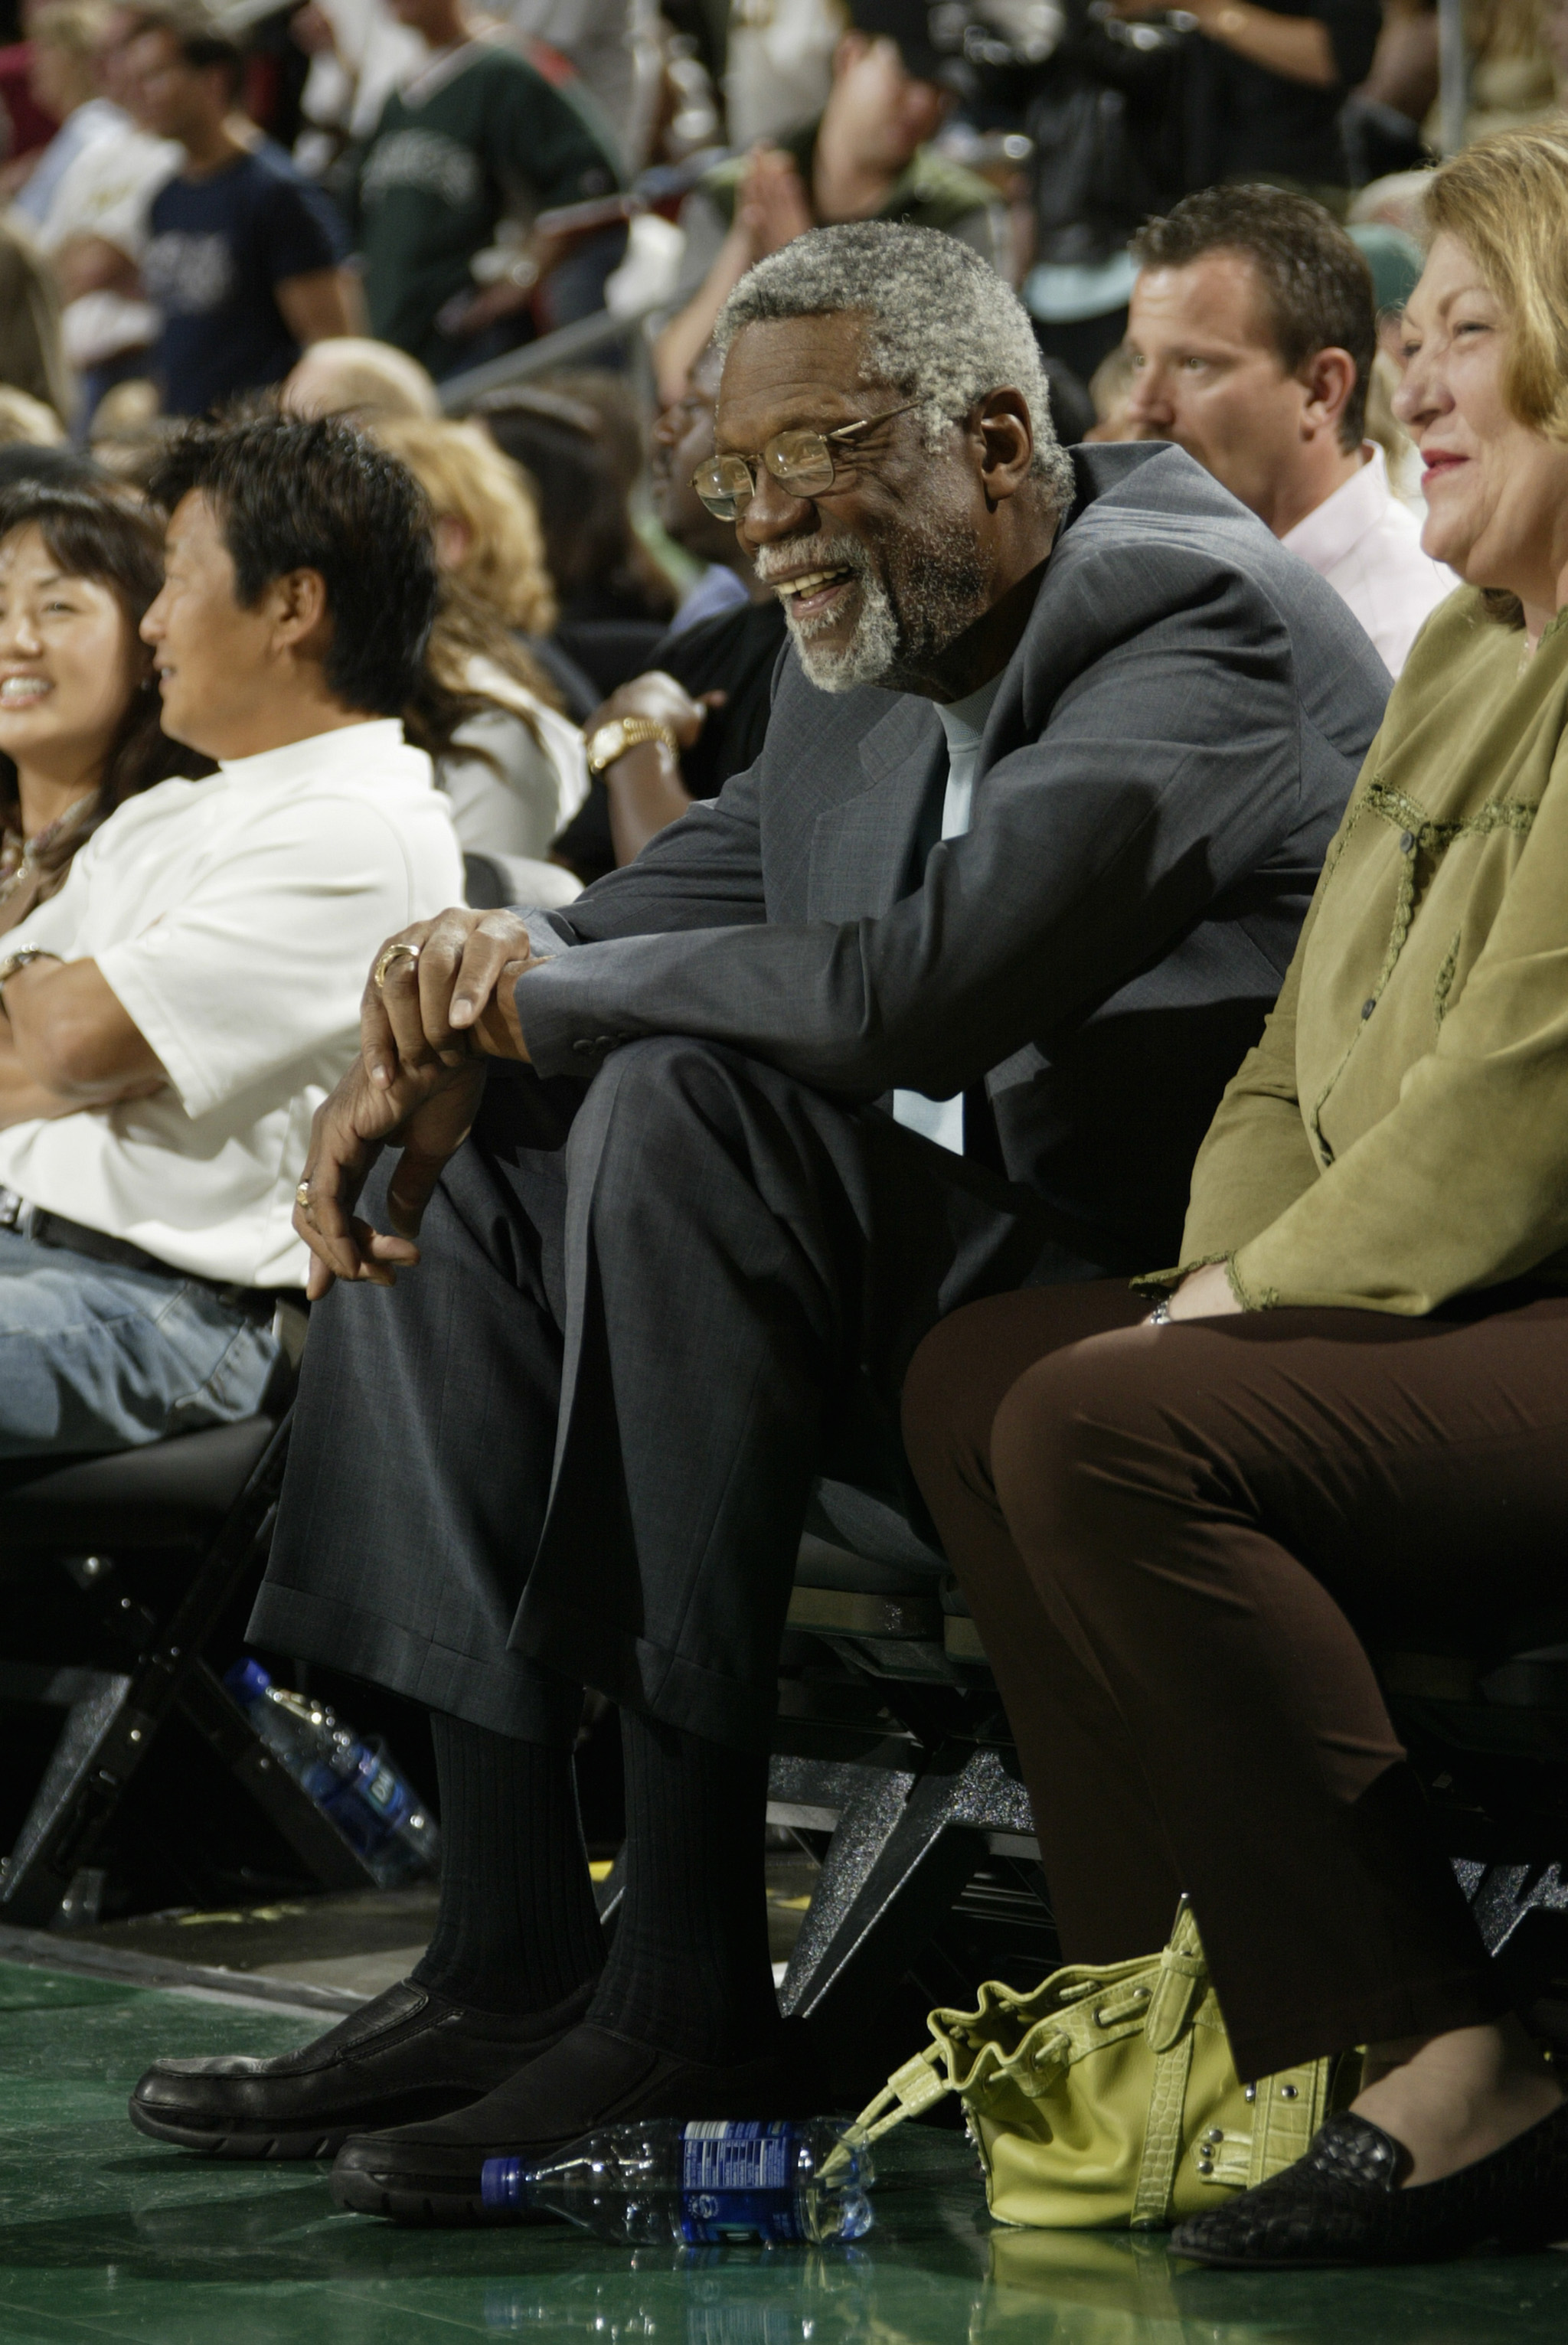 SEATTLE - MAY 15:  NBA Hall of Famer and Boston Celtics legend Bill Russell watches the Seattle SuperSonics play the San Antonio Spurs in Game four of the Western Conference Semifinals during the 2005 NBA Playoffs at Key Arena on May 15, 2005 in Seattle, 